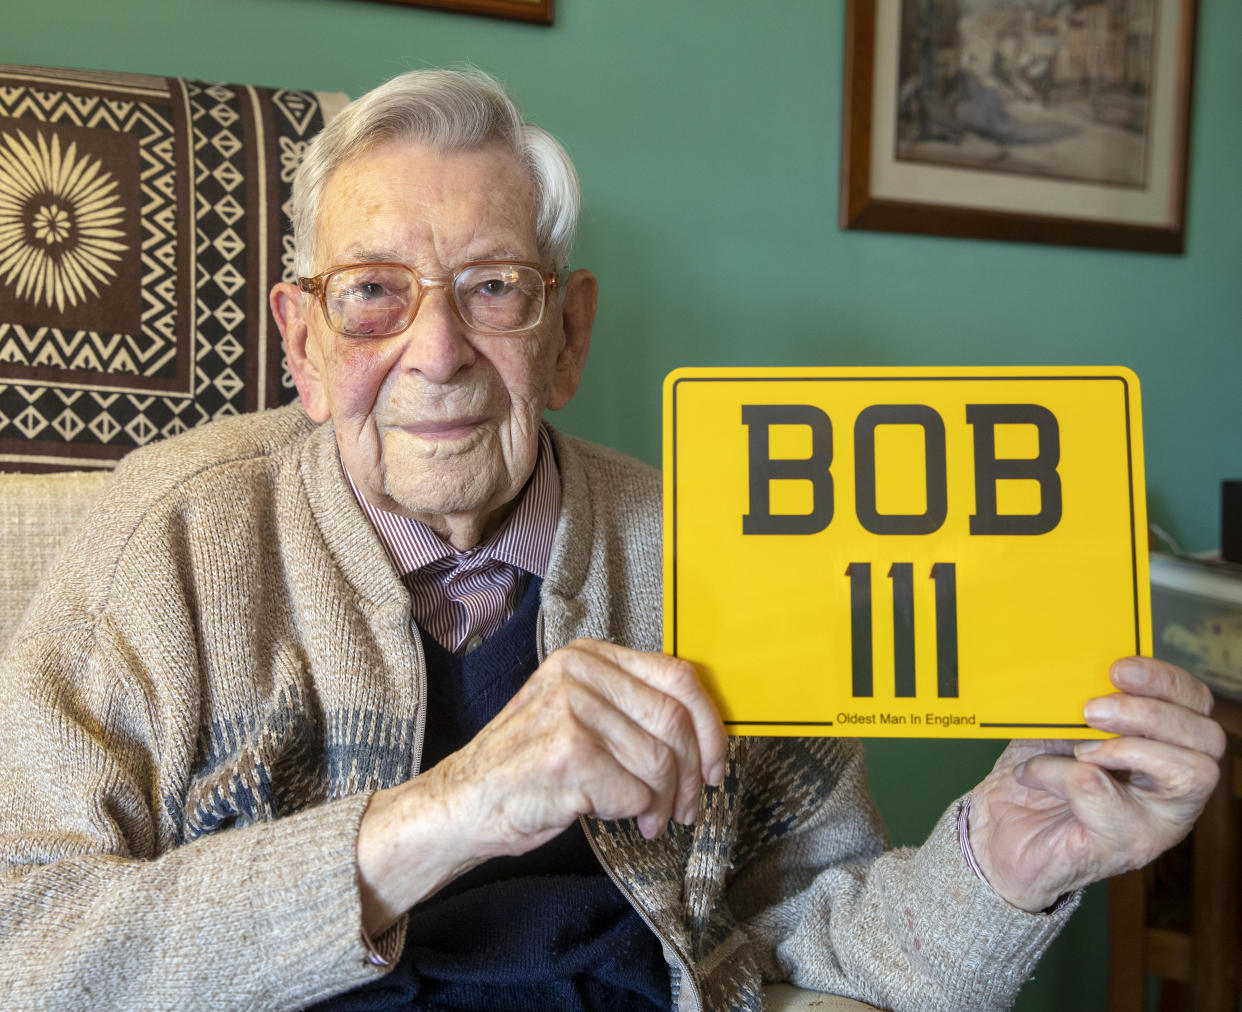 Bob Weighton with his personalised number plate. Source: PA